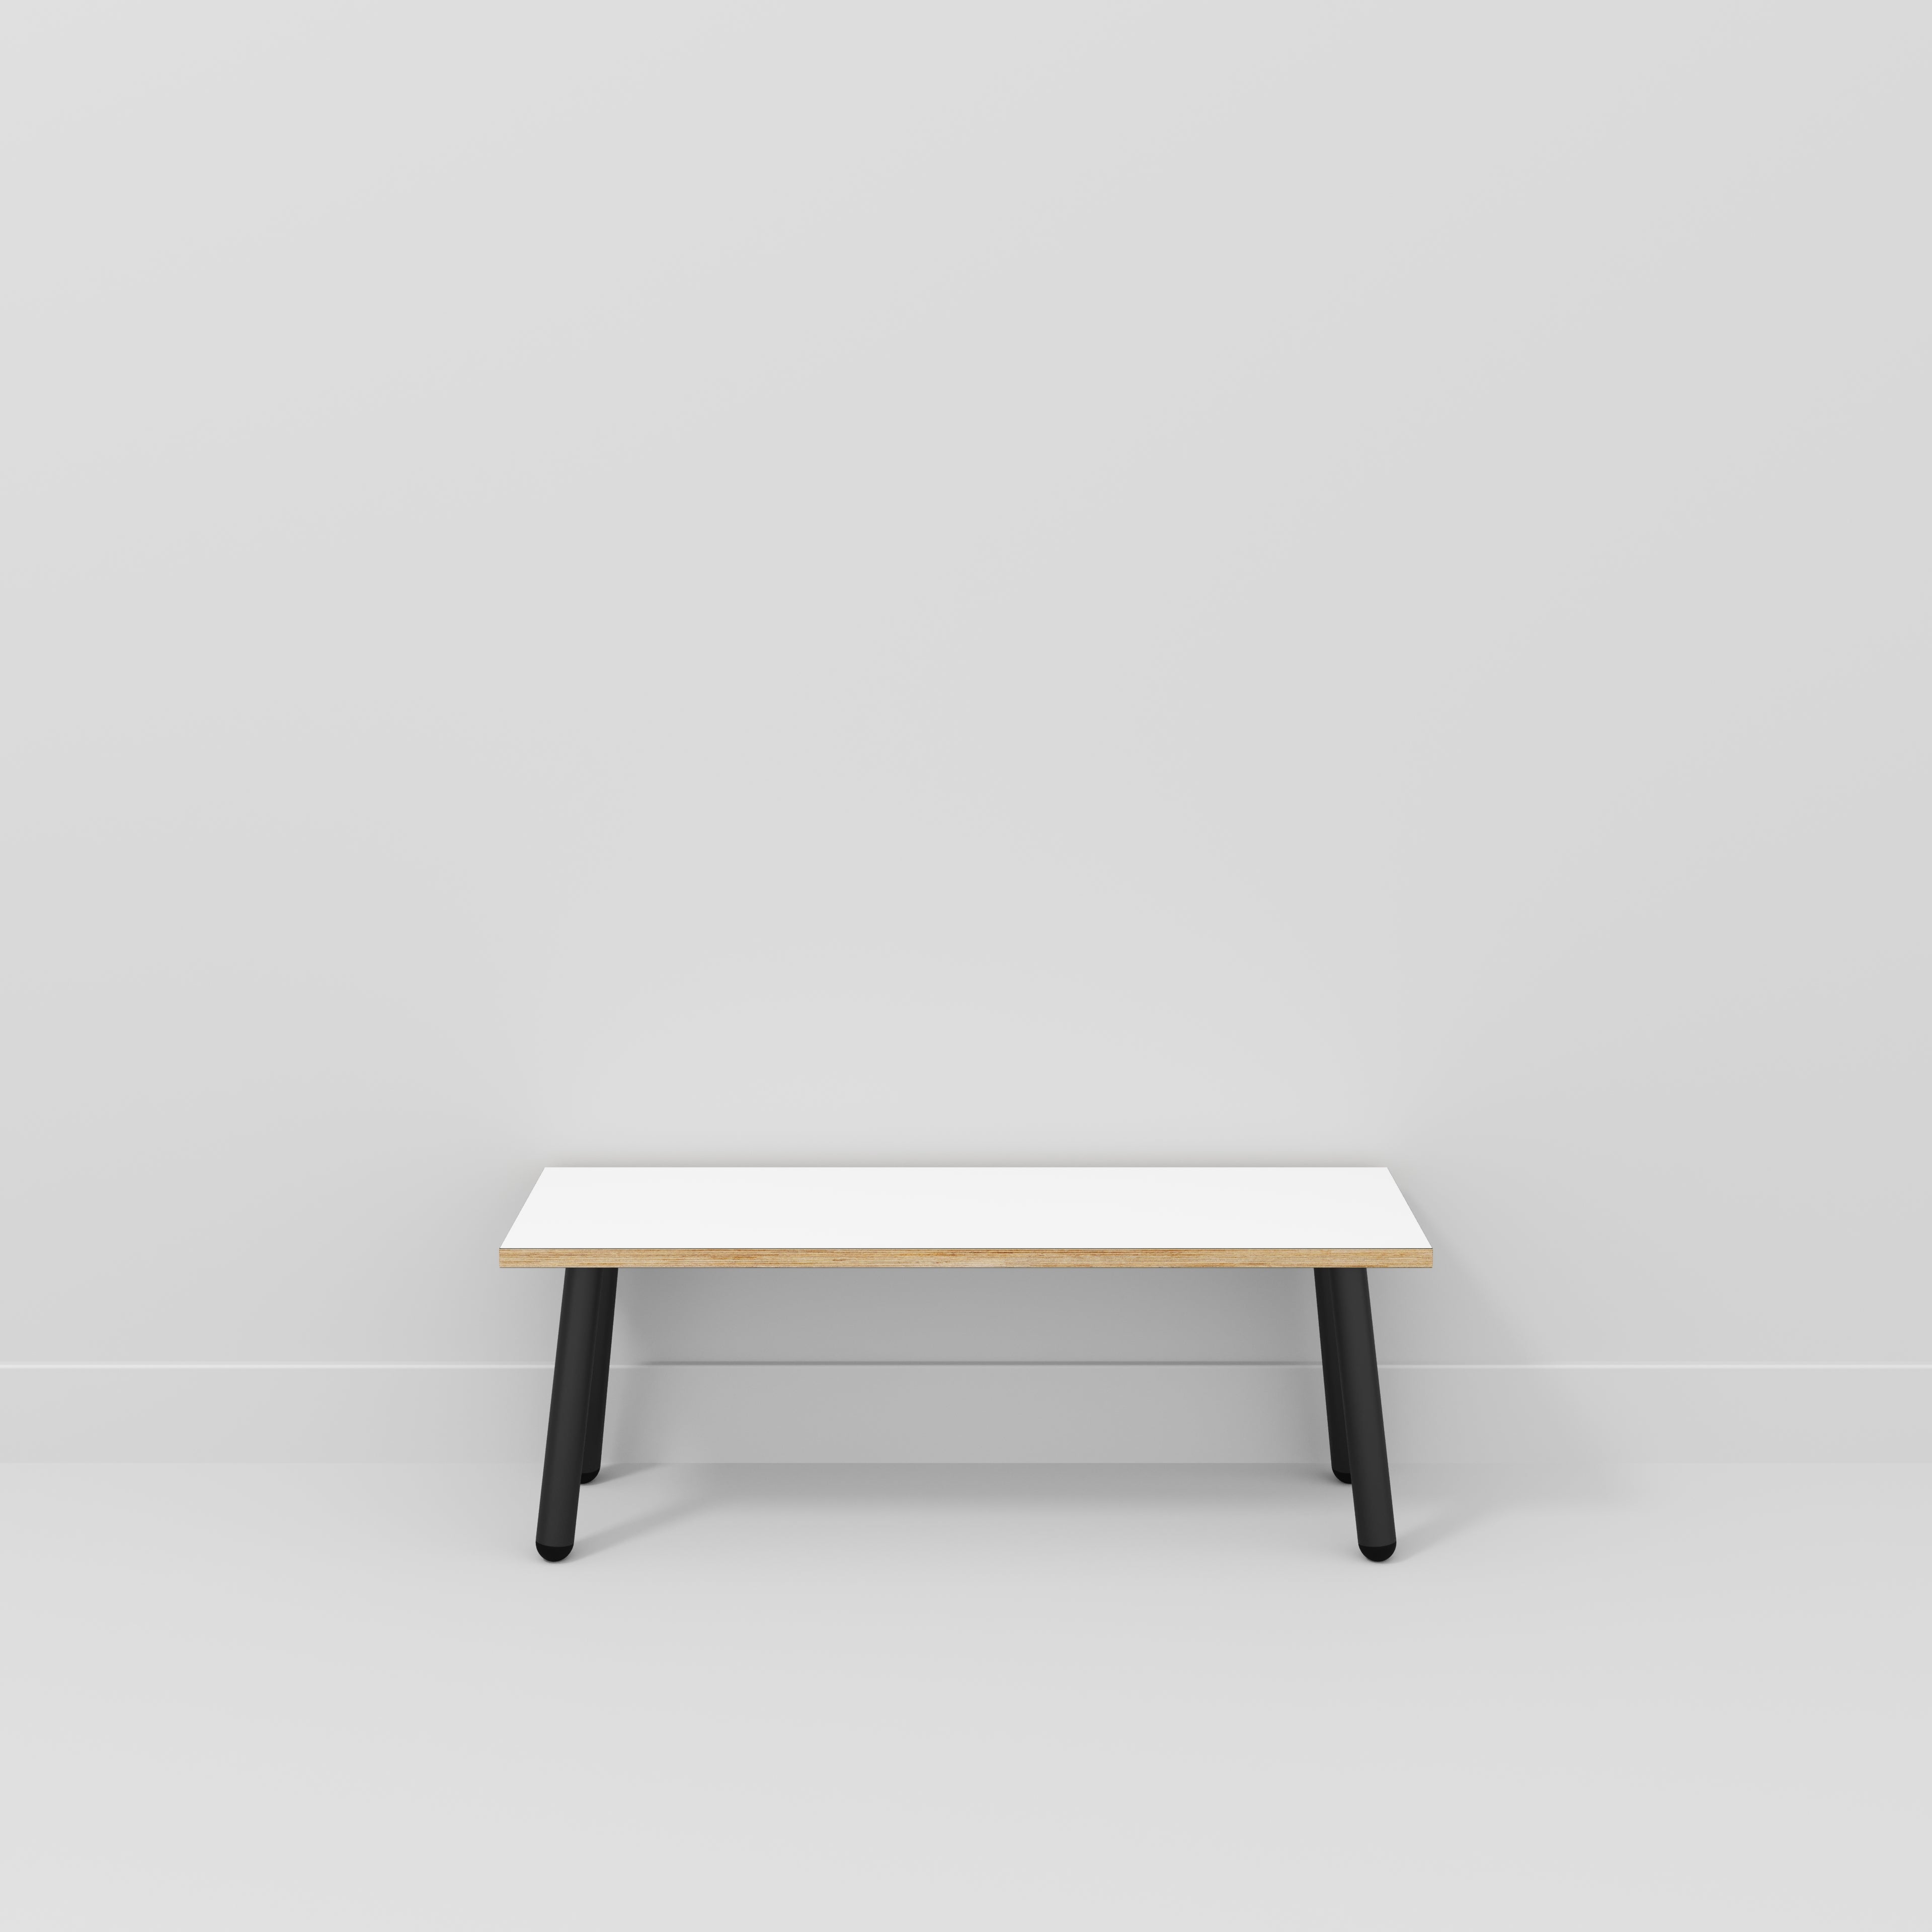 Bench Seat with Black Round Single Pin Legs - Formica White - 1200(w) x 400(d)